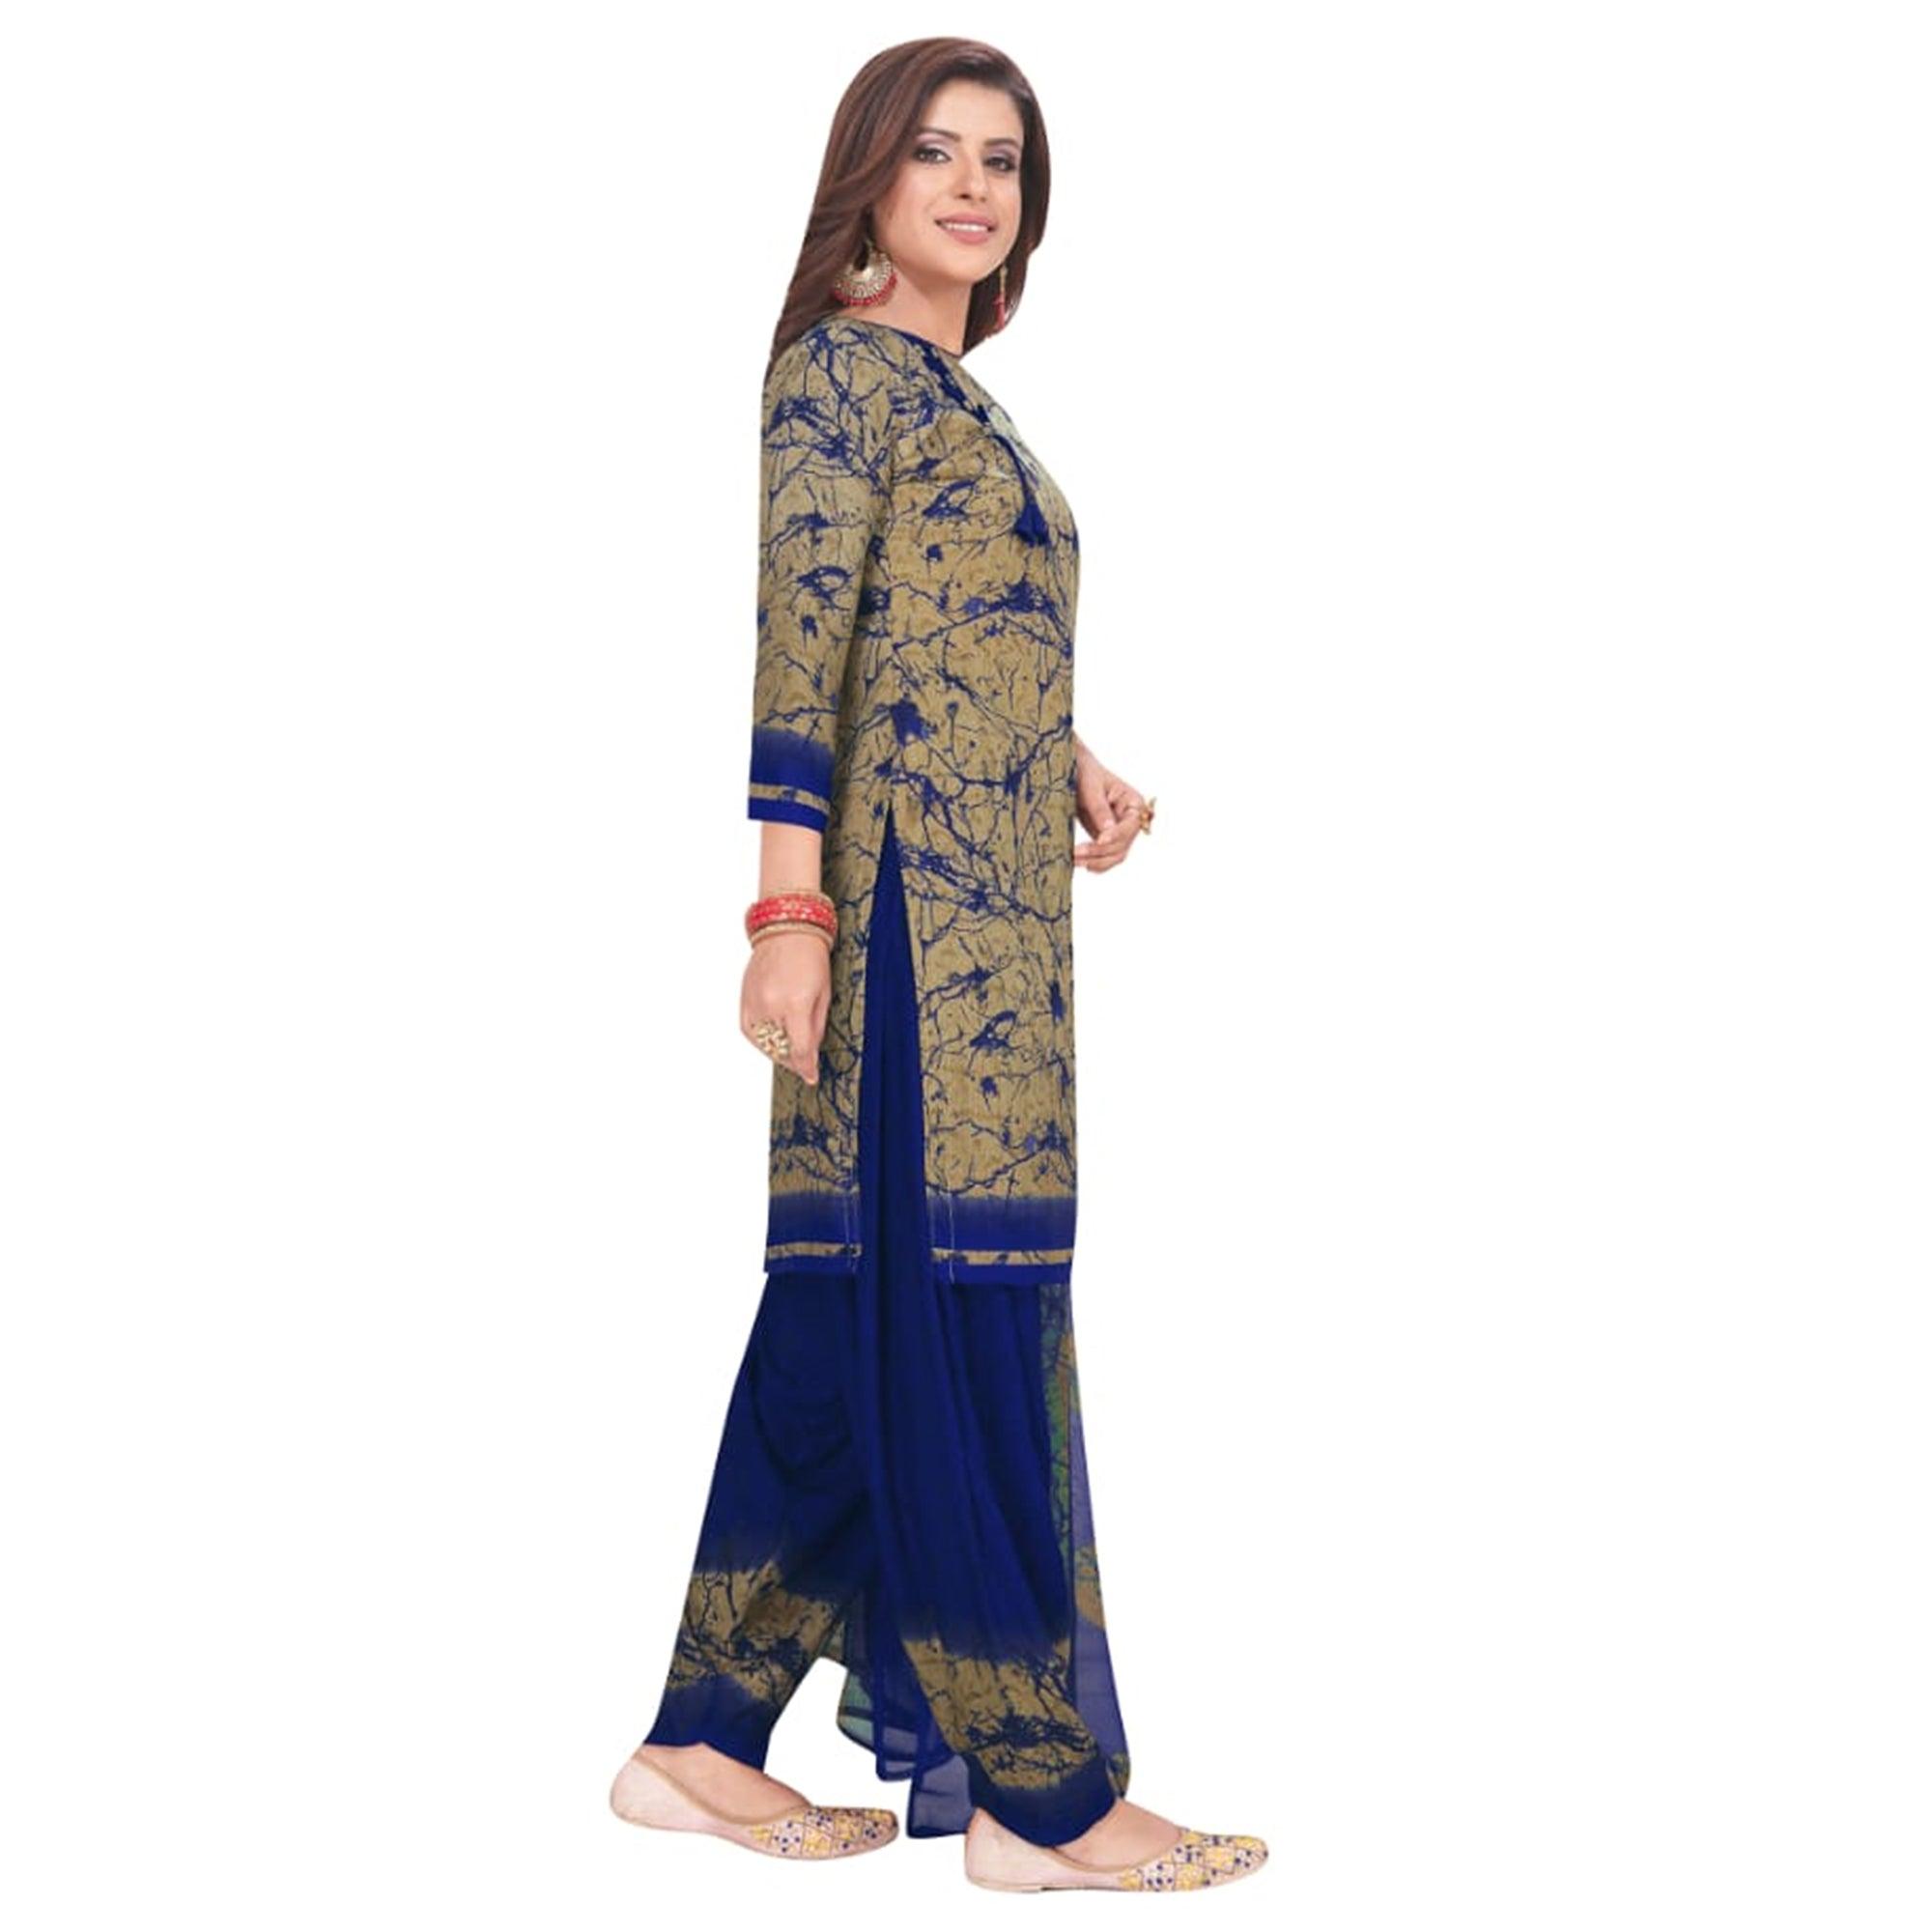 Charming Brown - Blue Colored Casual Wear Printed Crepe Patiala Dress Material - Peachmode